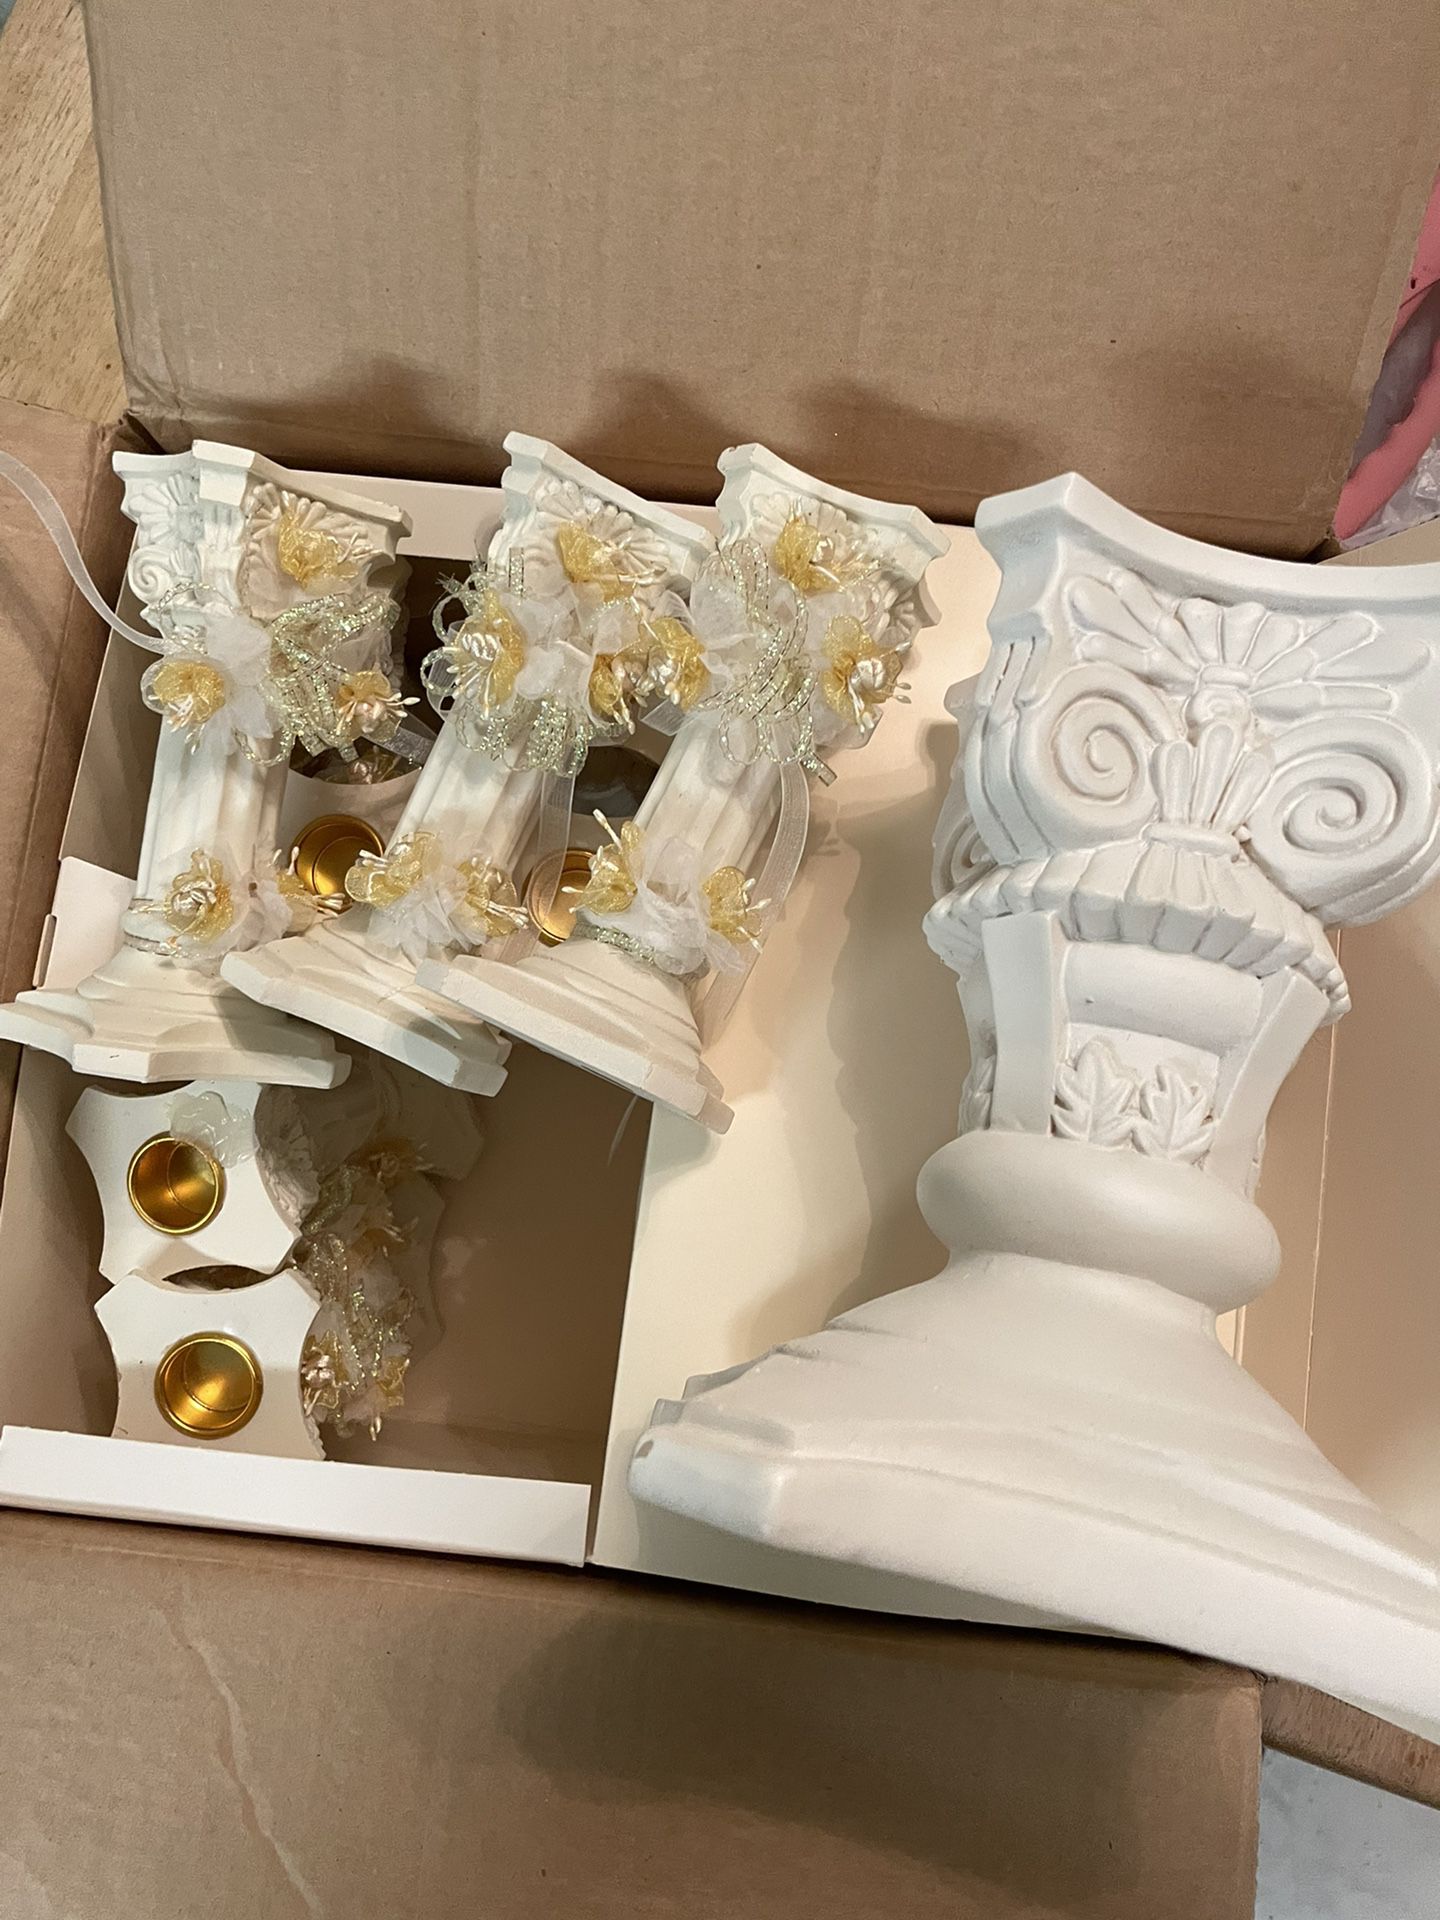 FREE Candle holders 